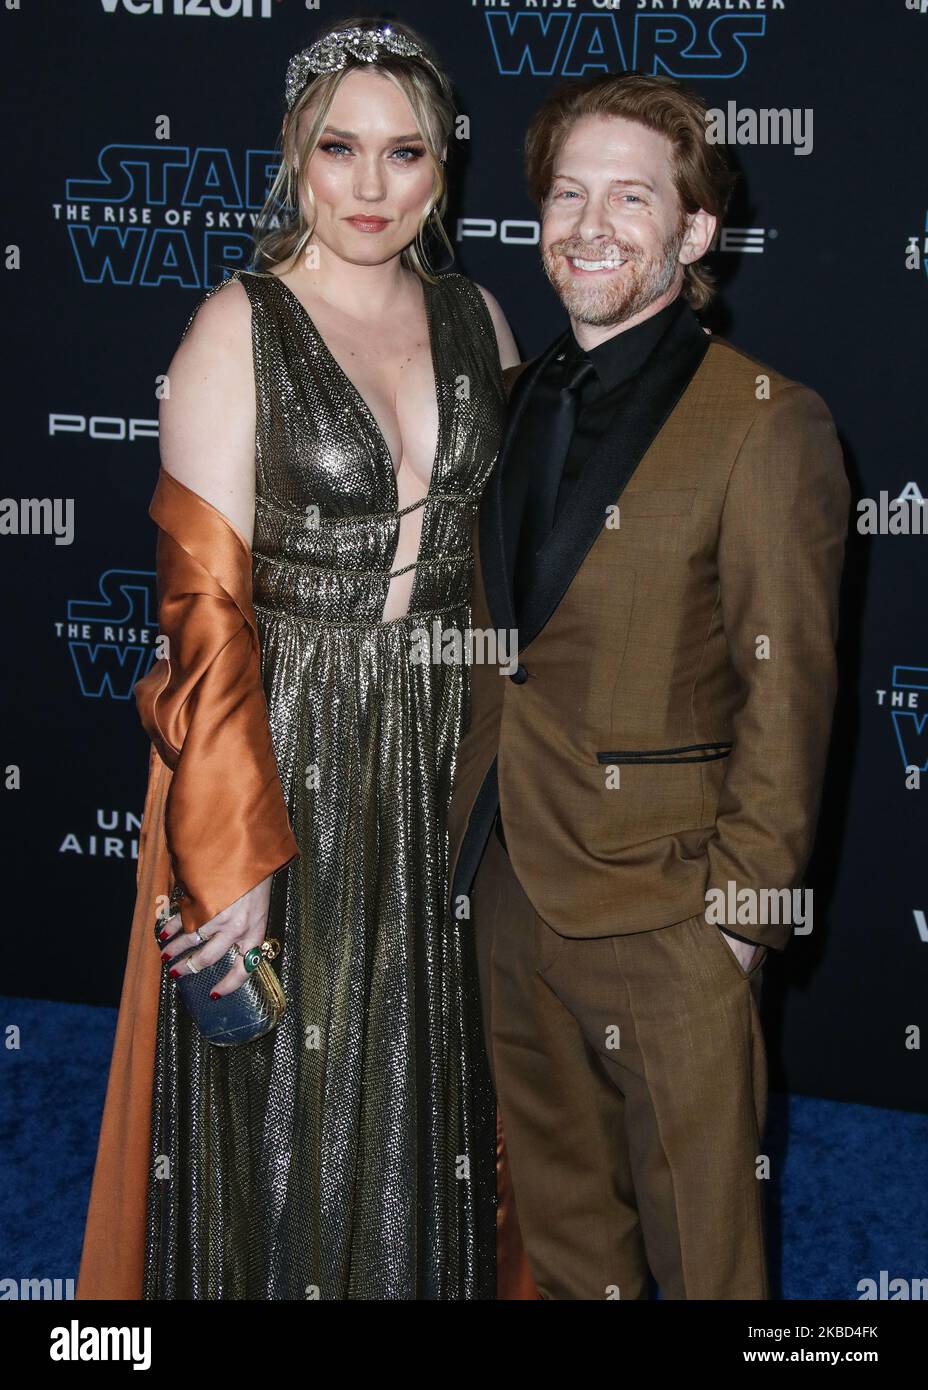 HOLLYWOOD, LOS ANGELES, CALIFORNIA, USA - DECEMBER 16: Clare Grant and Seth Green arrive at the World Premiere Of Disney's 'Star Wars: The Rise Of Skywalker' held at the El Capitan Theatre on December 16, 2019 in Hollywood, Los Angeles, California, United States. (Photo by Xavier Collin/Image Press Agency/NurPhoto) Stock Photo